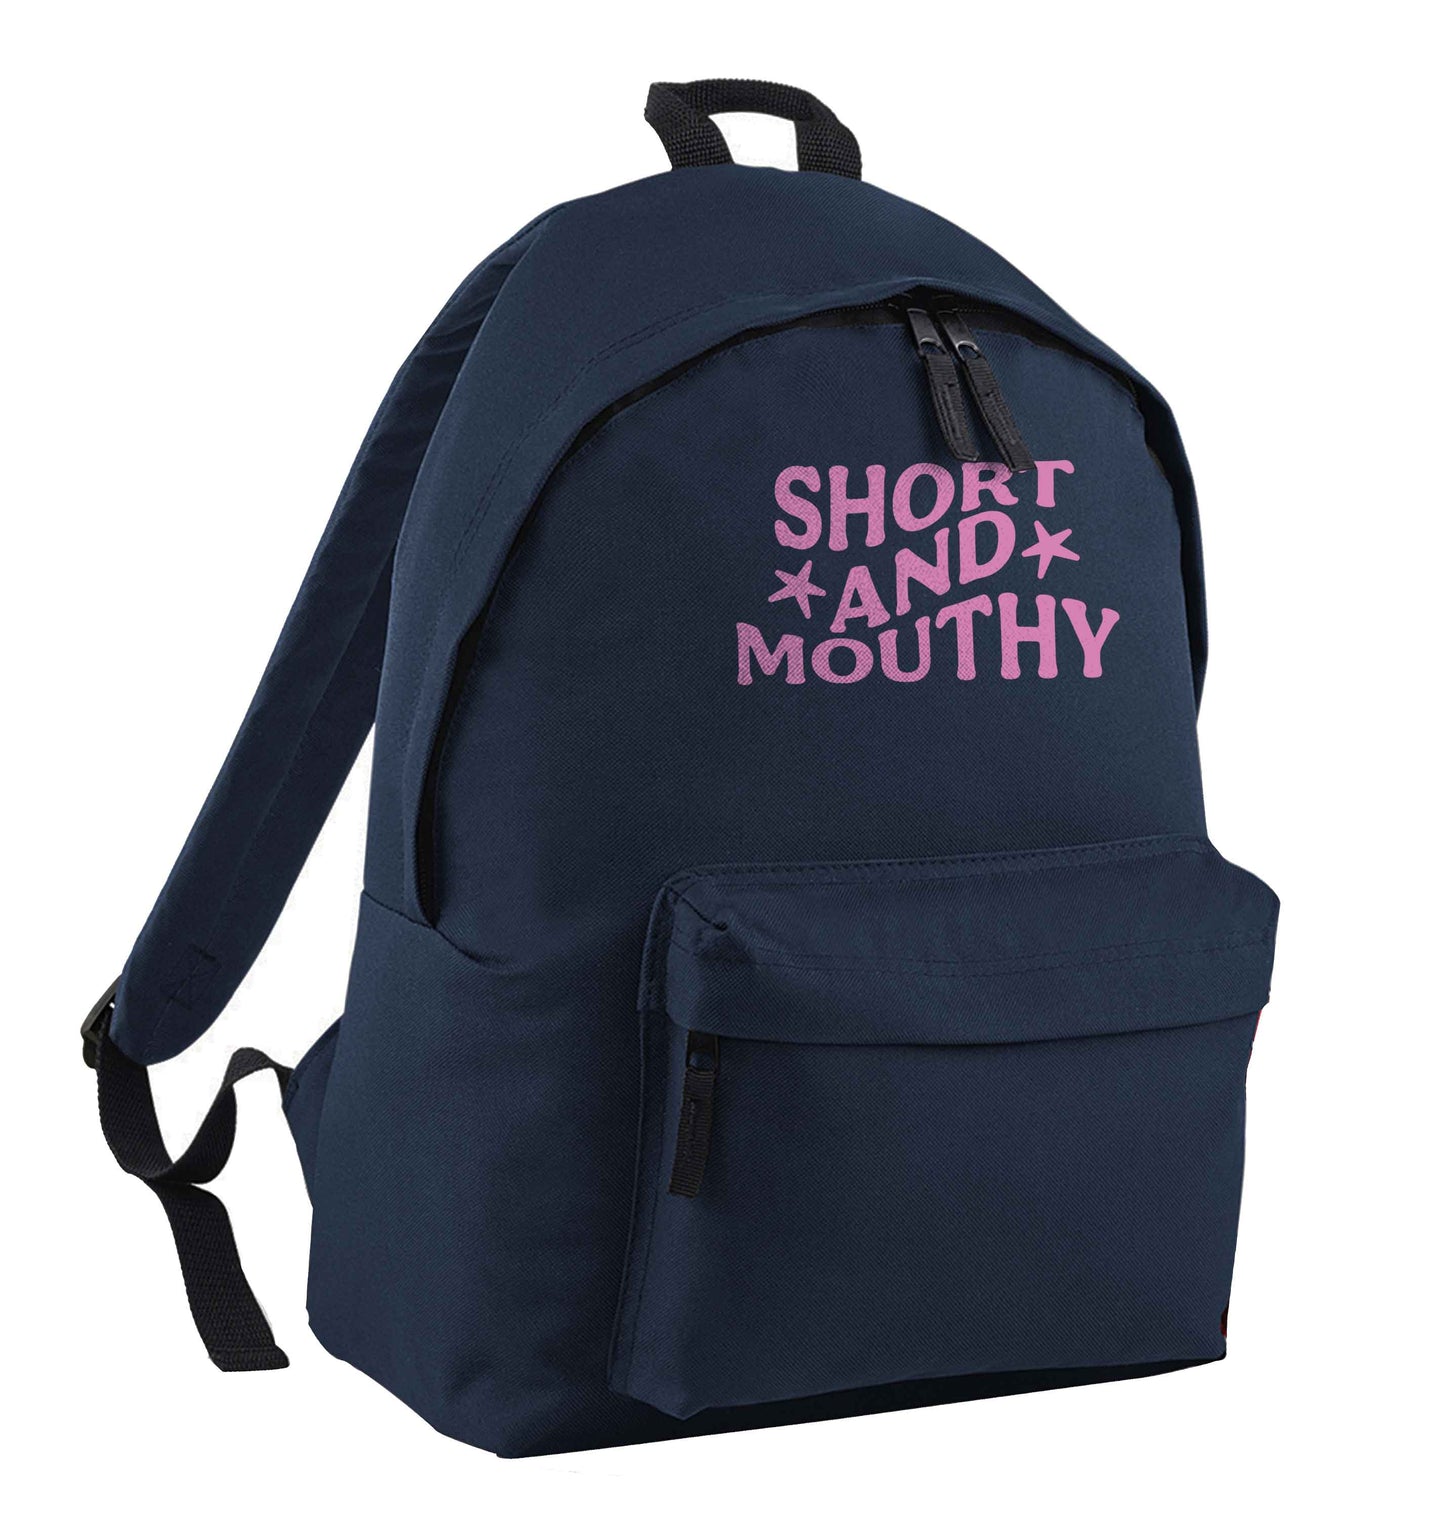 Short and mouthy navy adults backpack